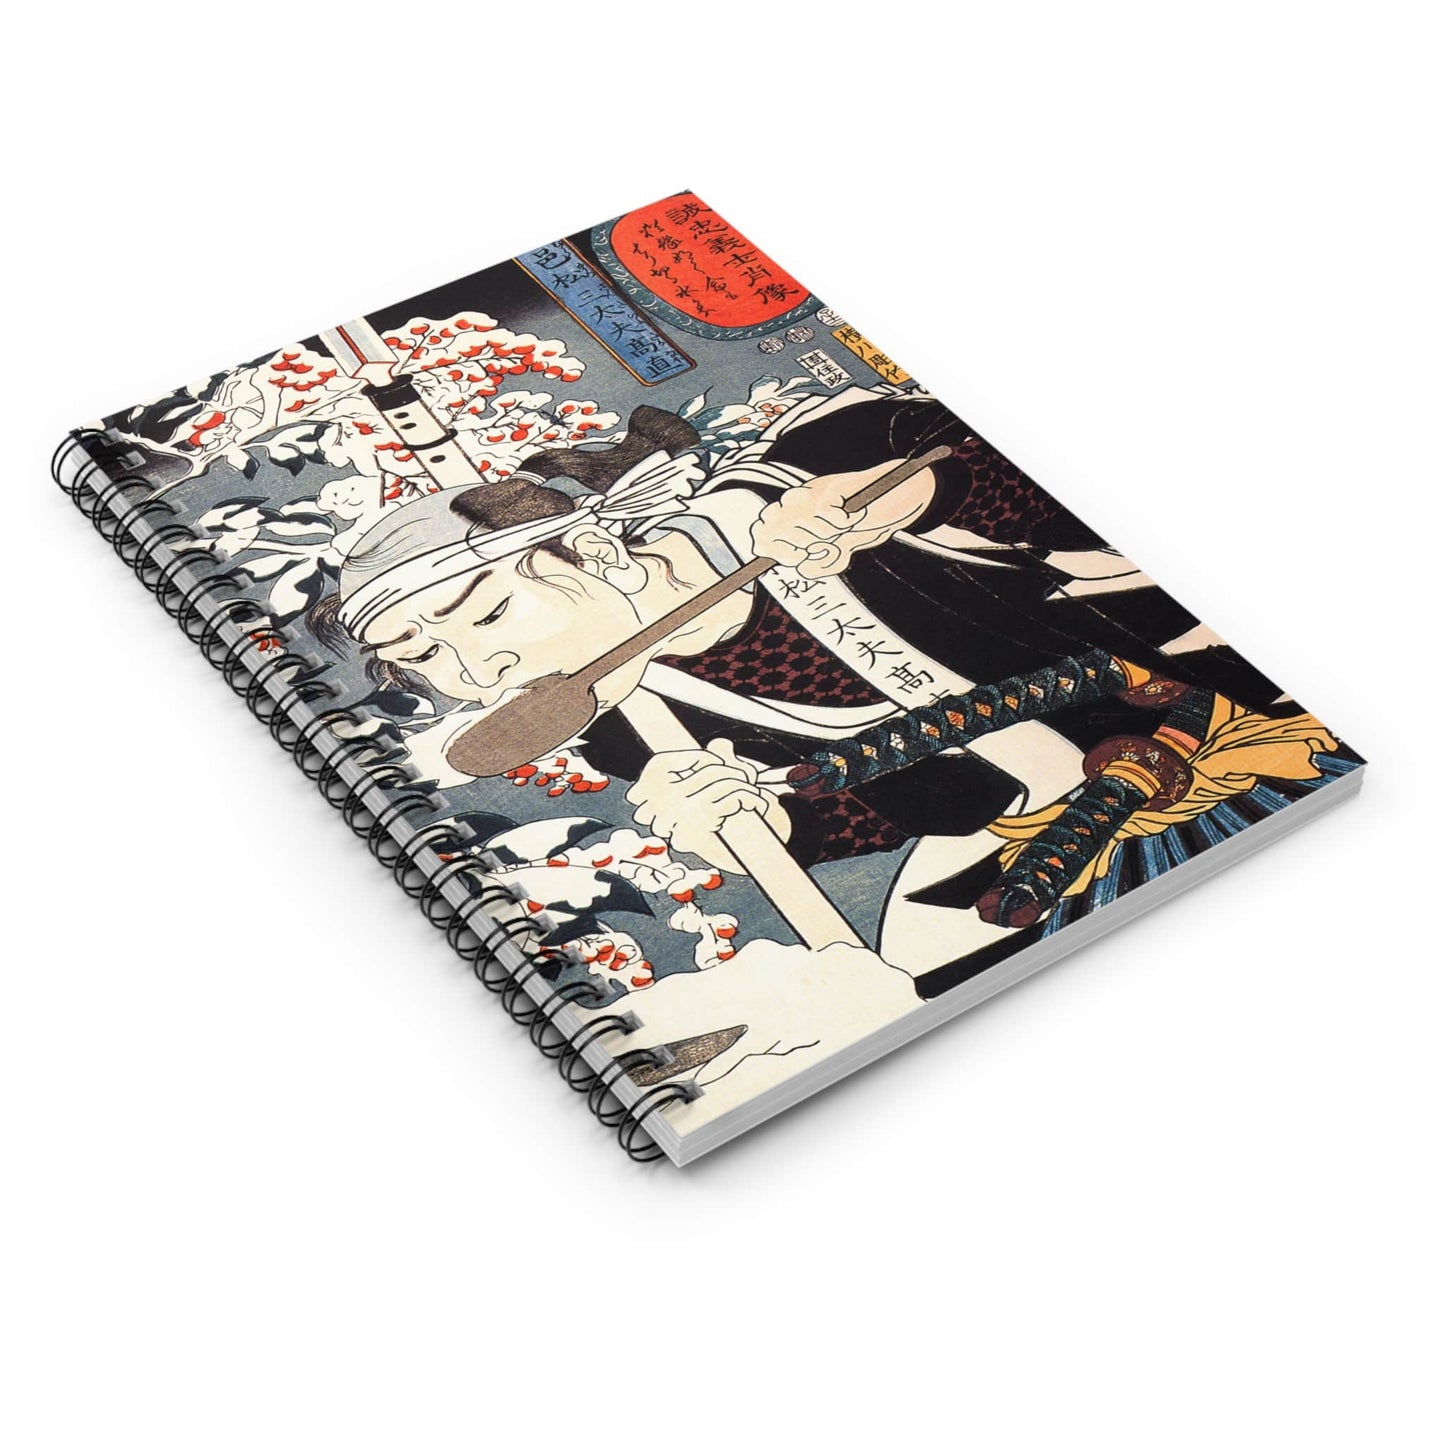 Japanese Warrior Spiral Notebook Laying Flat on White Surface